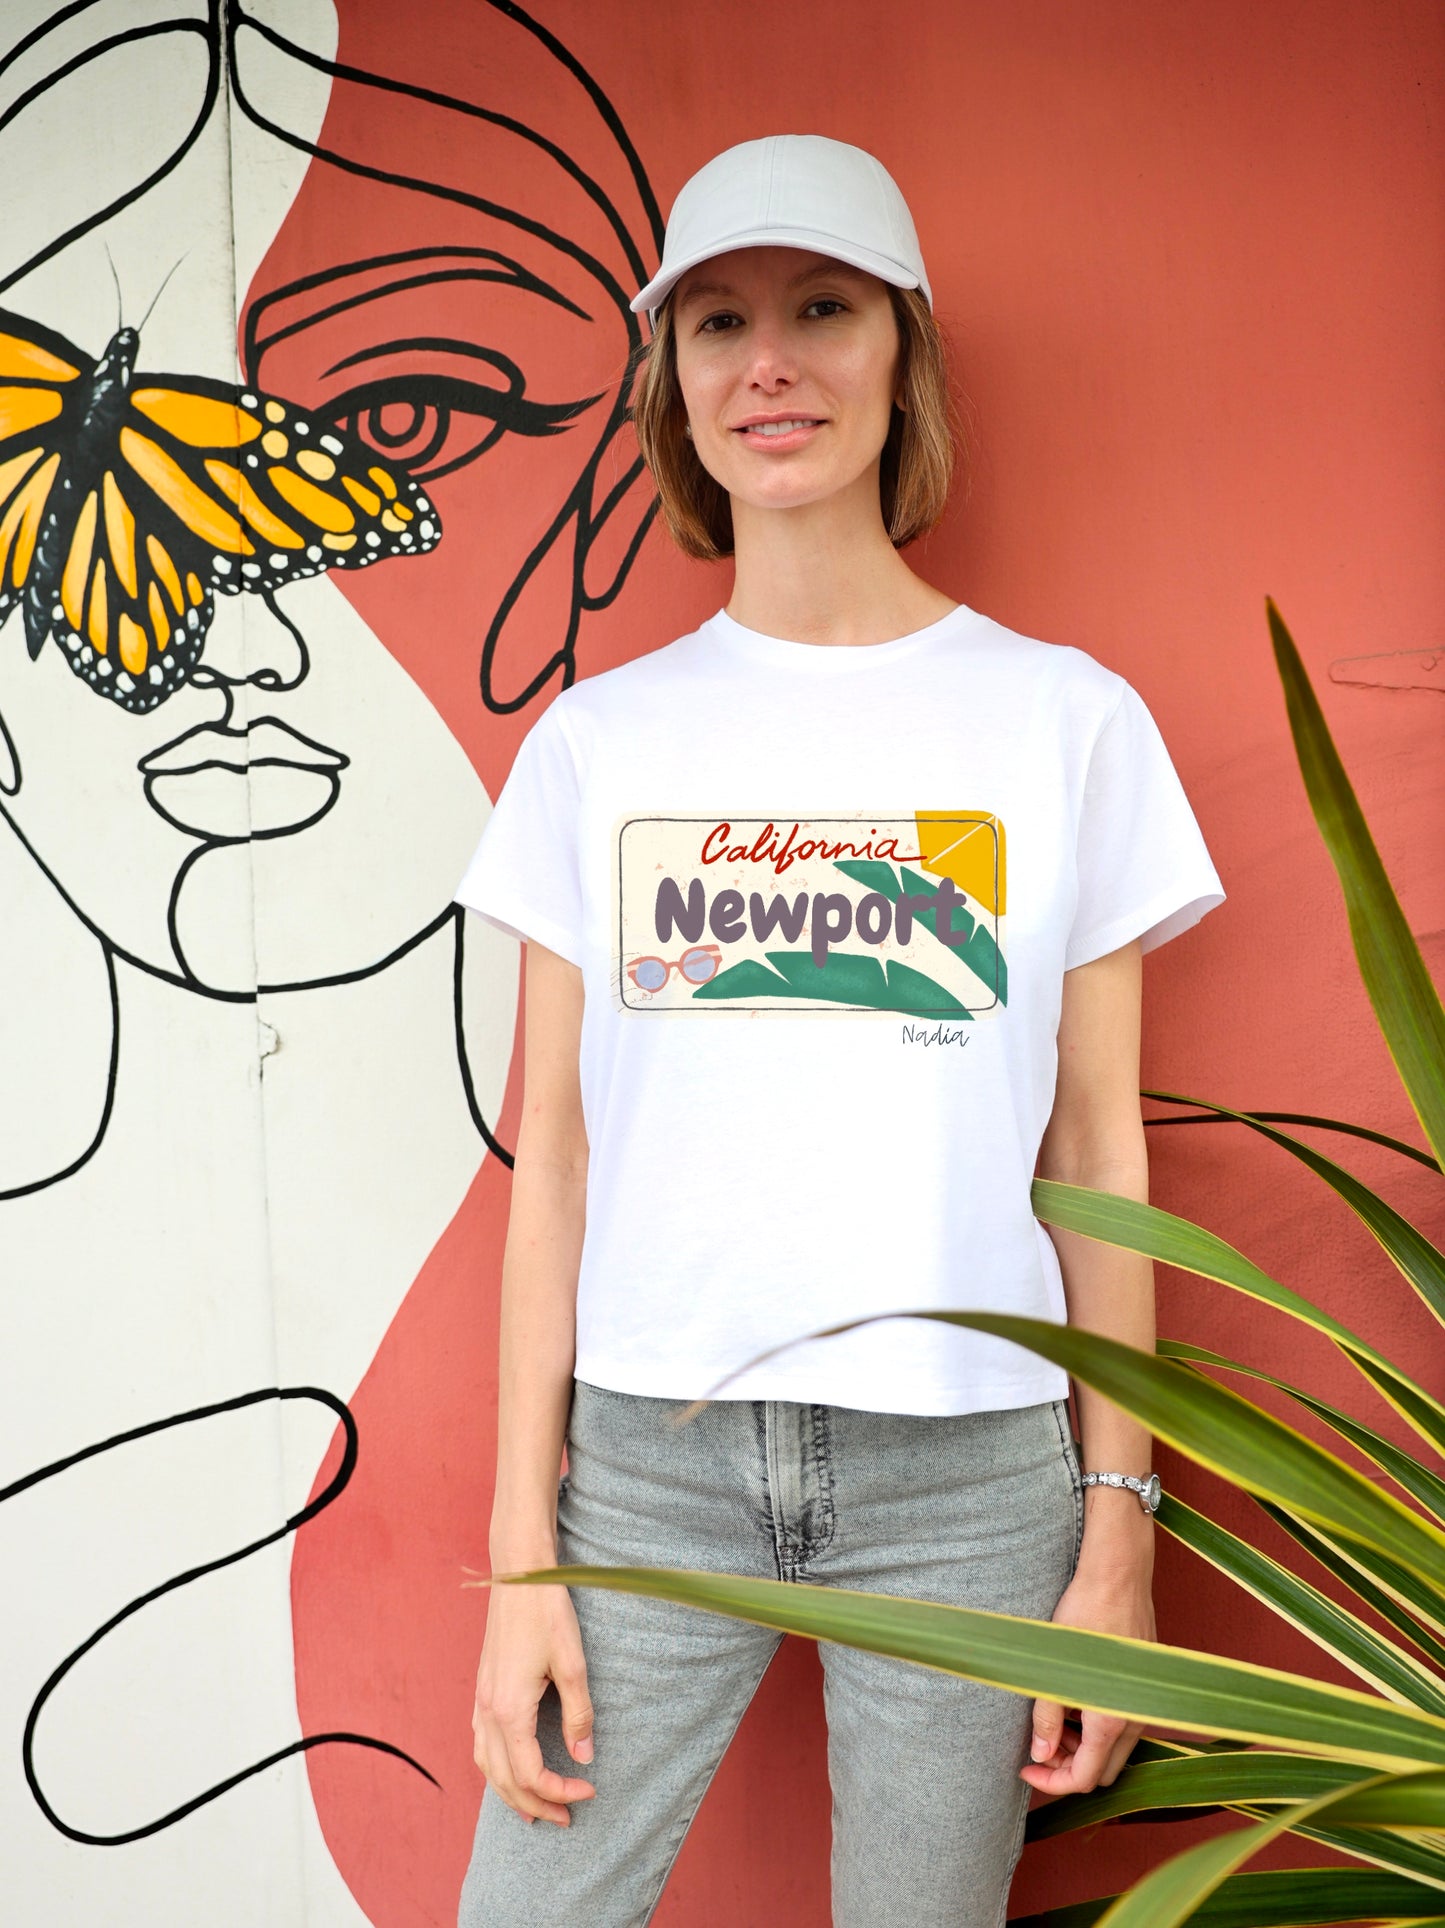 California Driver License illustrated tee for women. Designed and handmade by a local artist Nadia Watts in Newport Beach